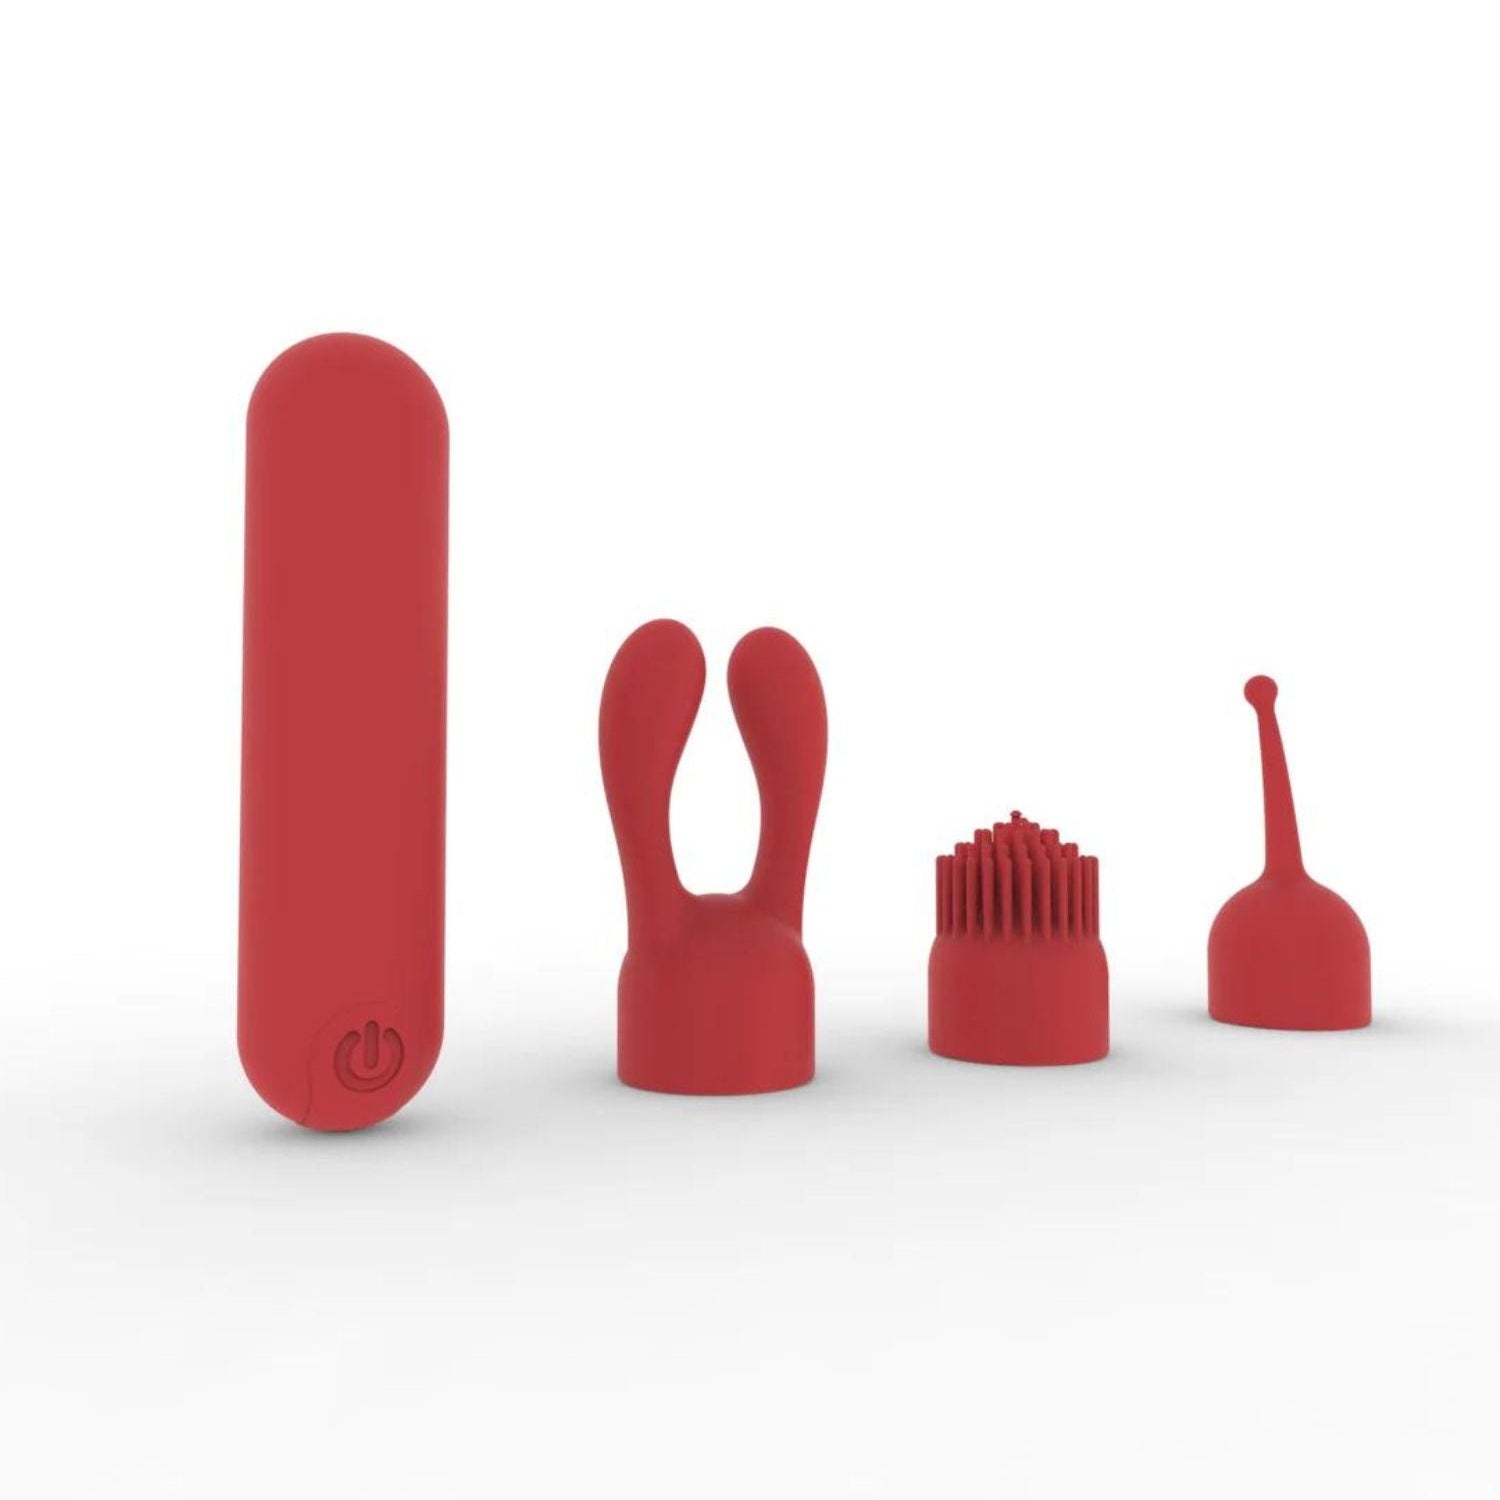 Liebe Seele Dynamic Silicone Vibration Massager (Red)